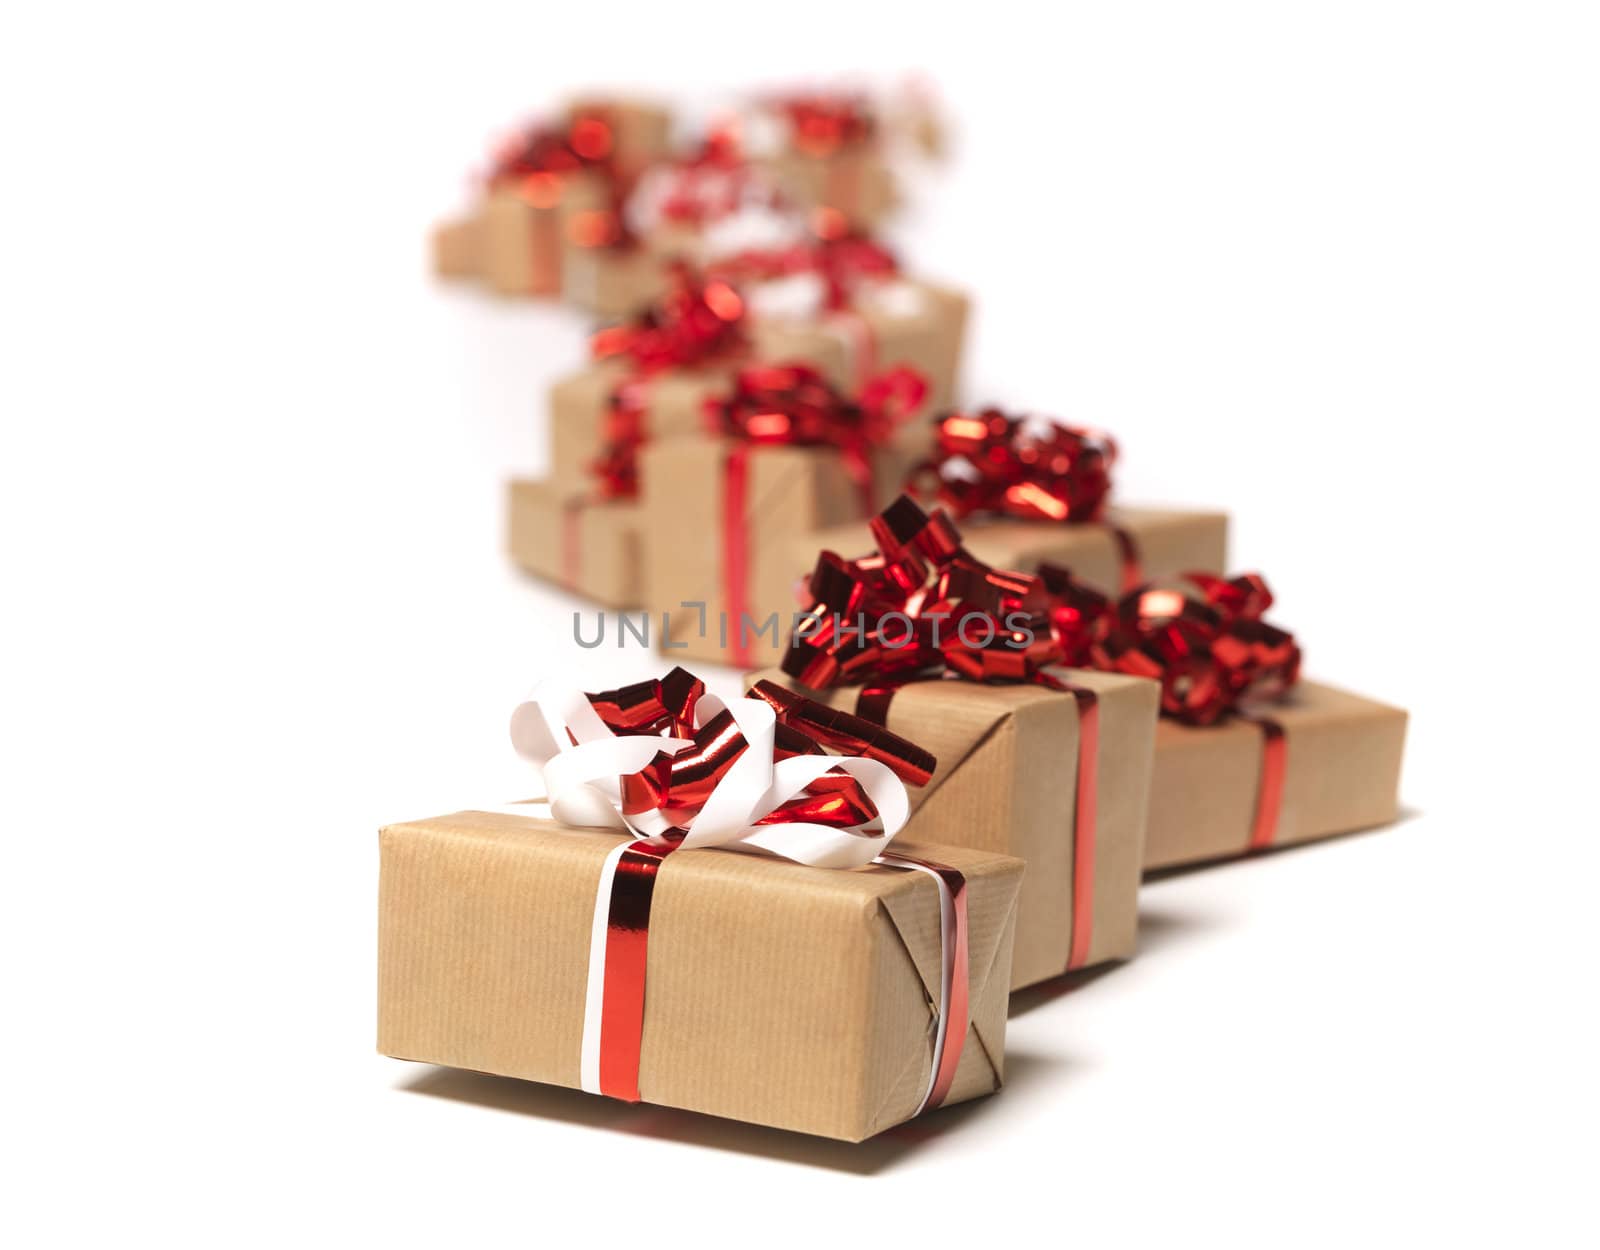 Christmas gifts in a row by gemenacom